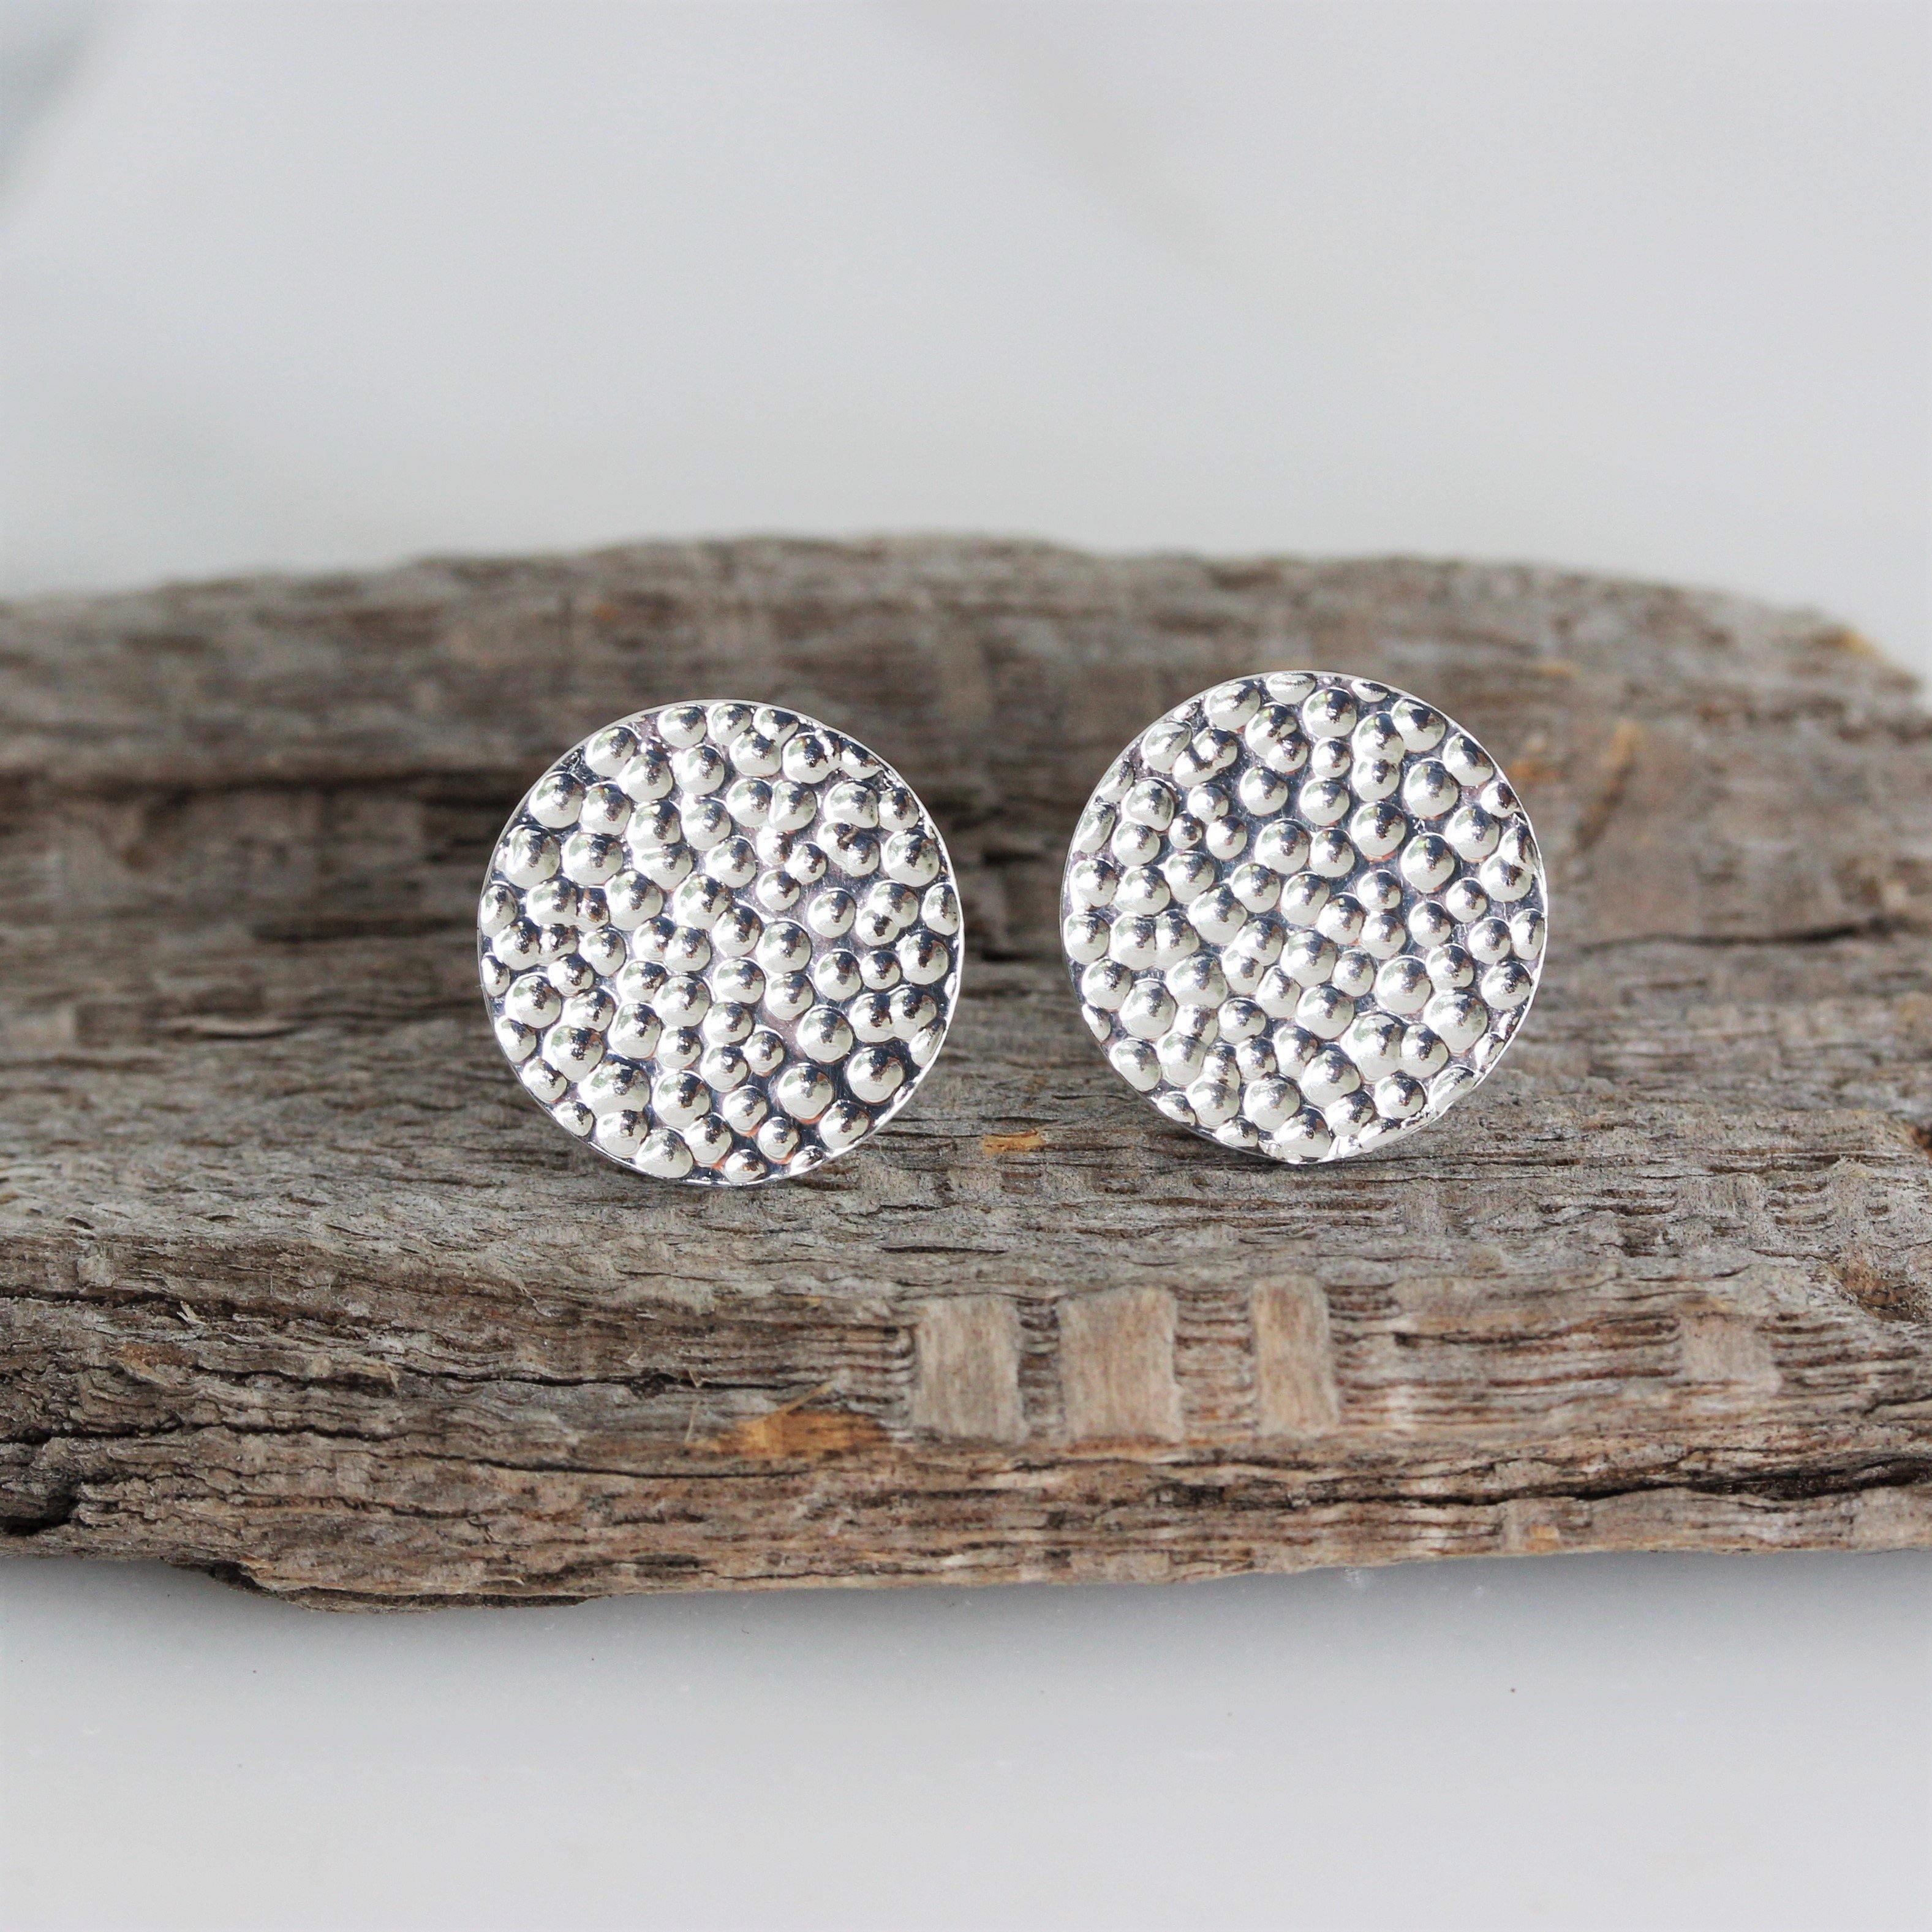 Sterling Silver 12mm Round Hammered Beaten Flat Disc Stud Earrings - STERLING SILVER DESIGNS